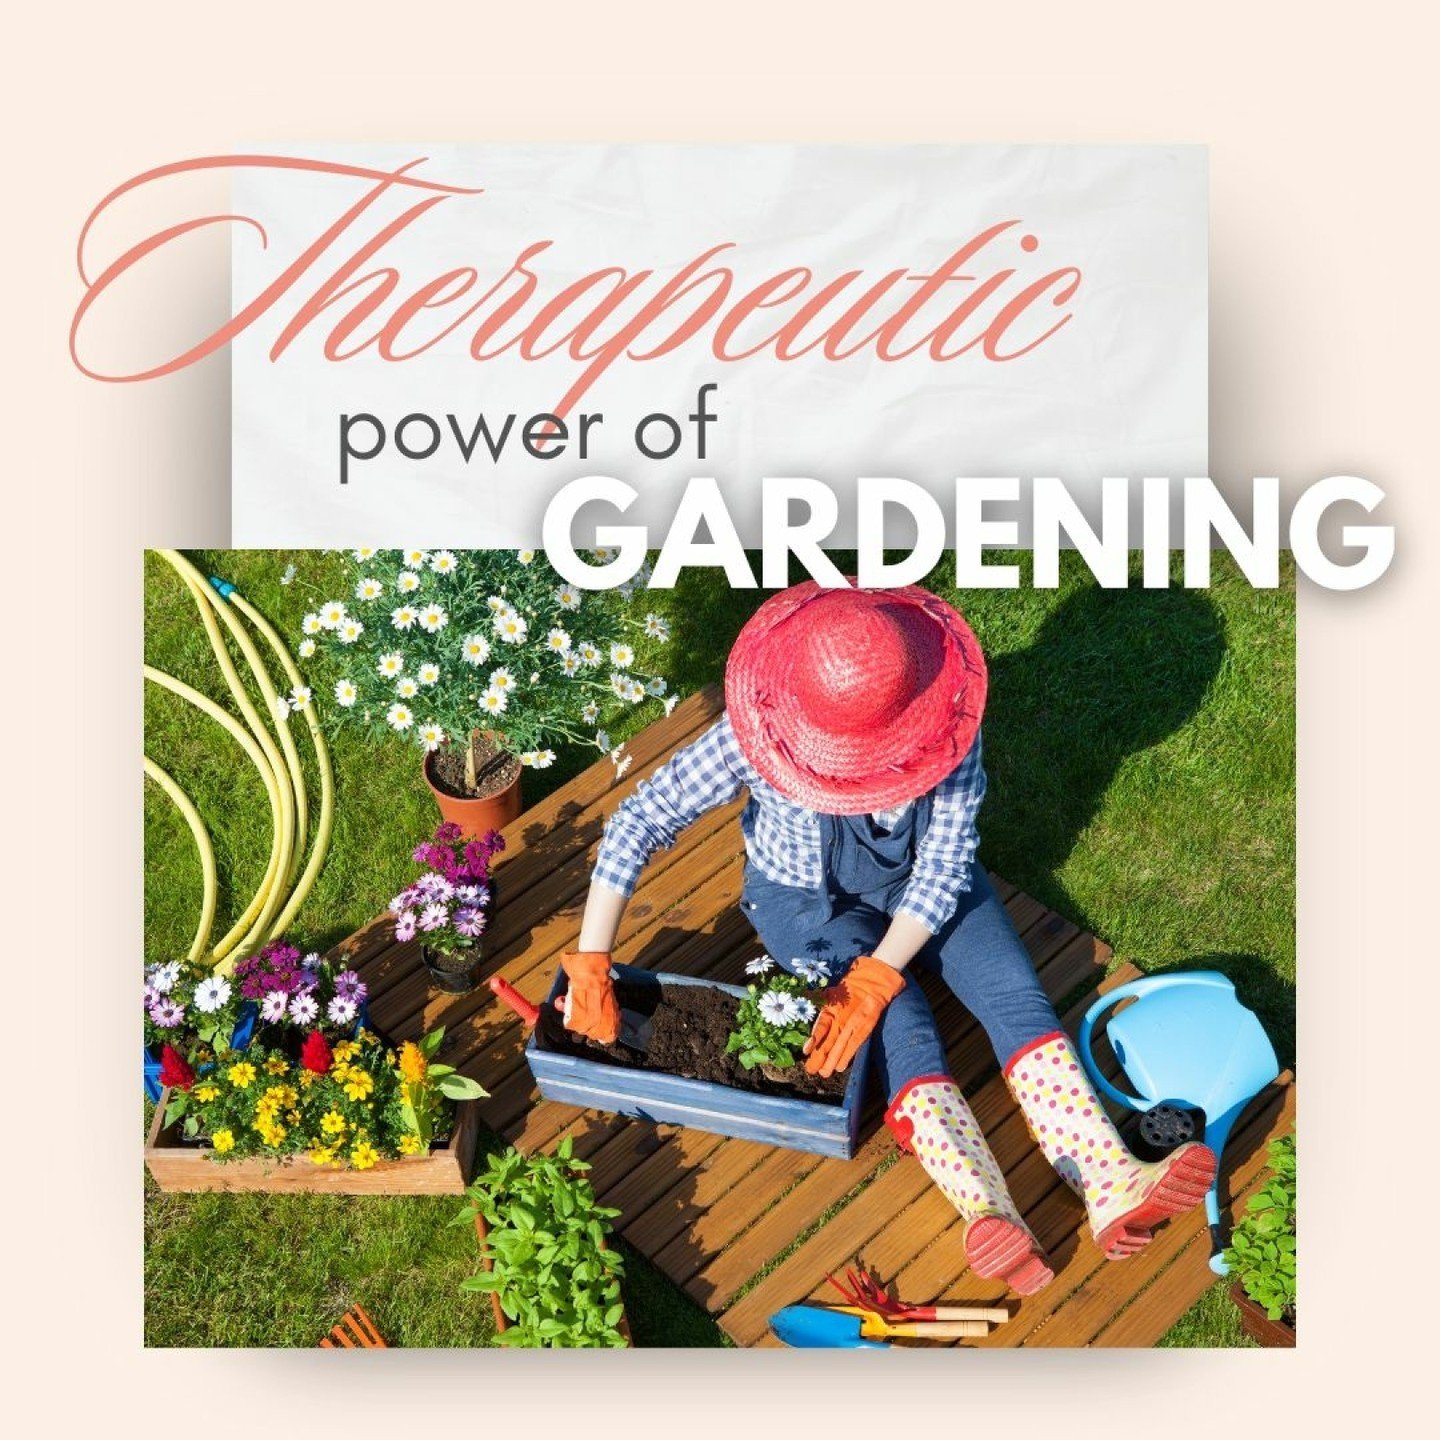 🌿Are you ready to embrace the therapeutic power of gardening? 

🌱 Whether you're a seasoned gardener or just starting out, creating your own green space can improve your overall physical and mental wellness. 

Here are some highlights:

🌻 Reduce S